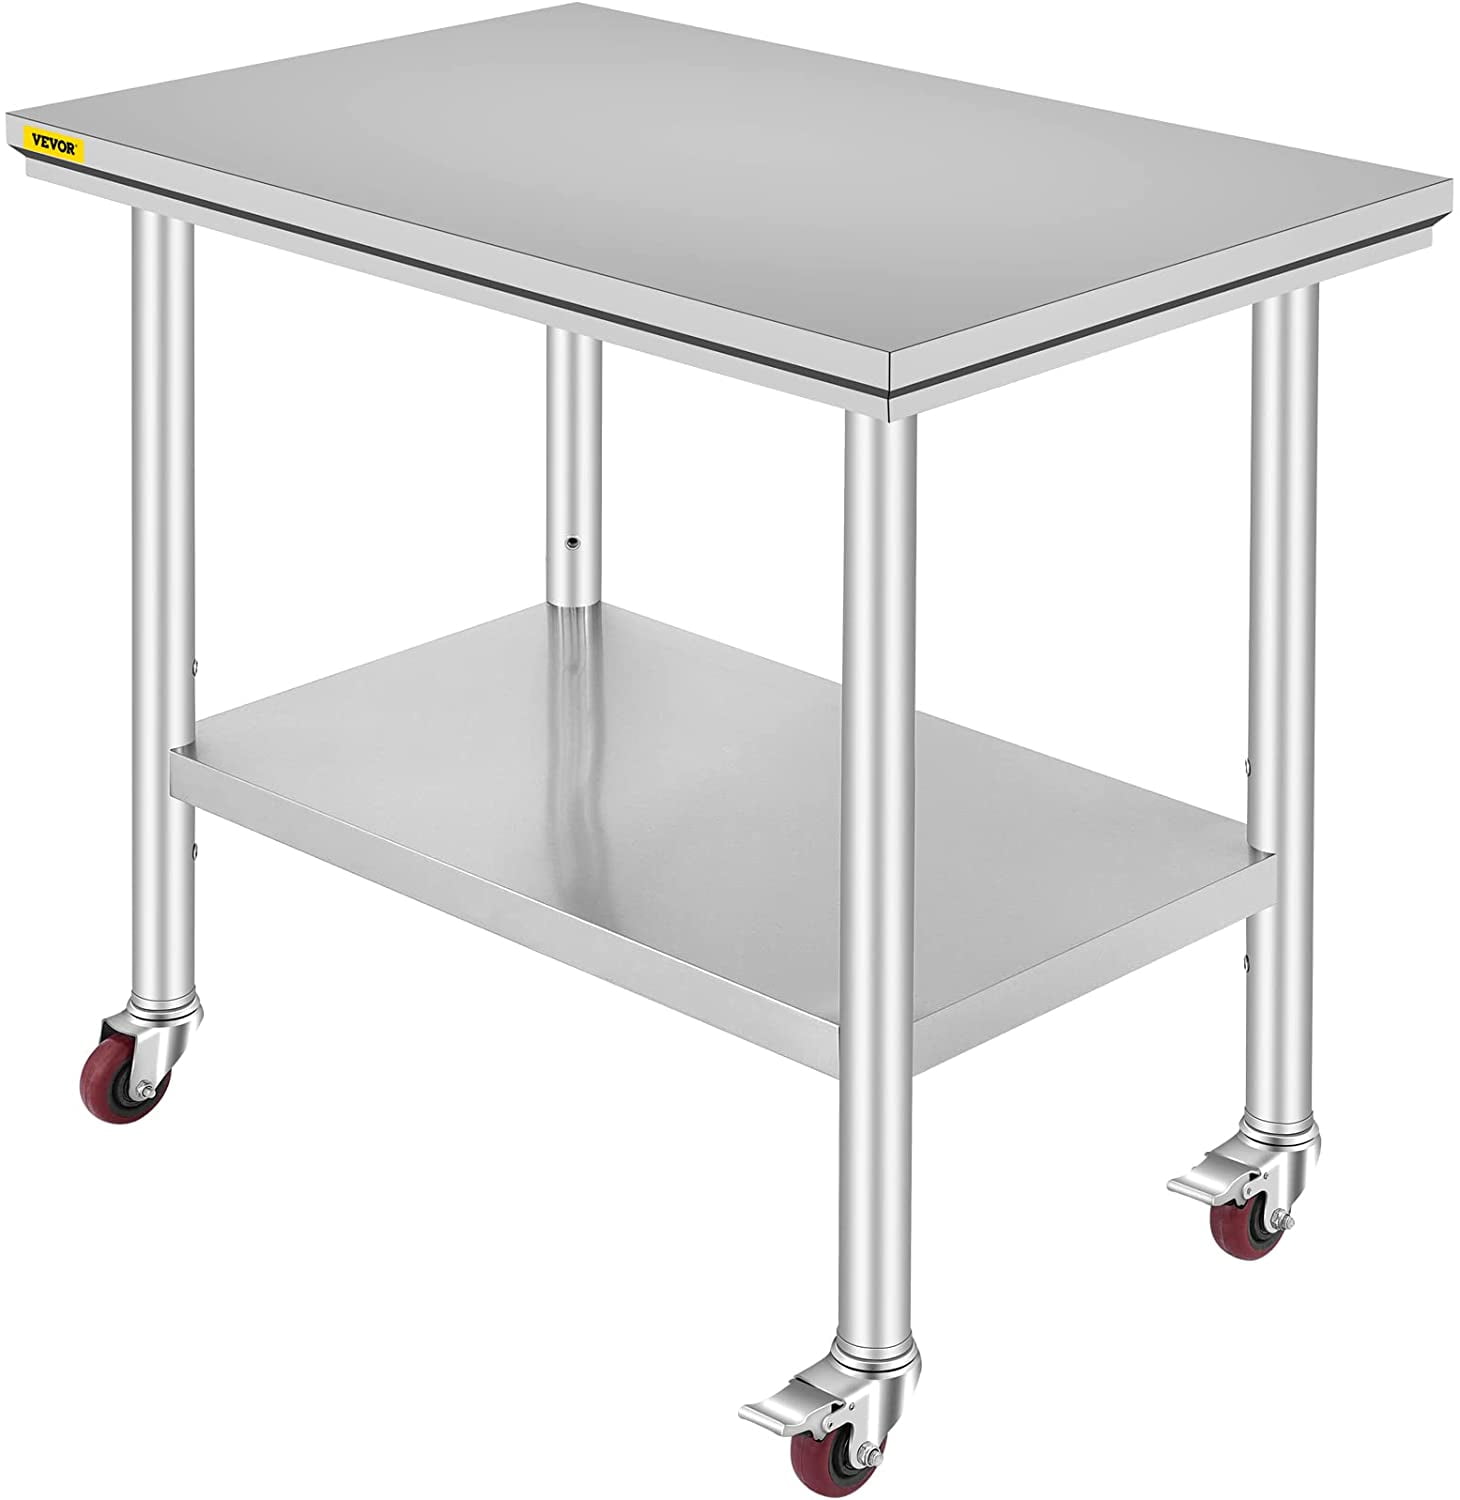 24" x 36" Kitchen Stainless Steel Commercial Kitchen Food Prep Table Desk New 